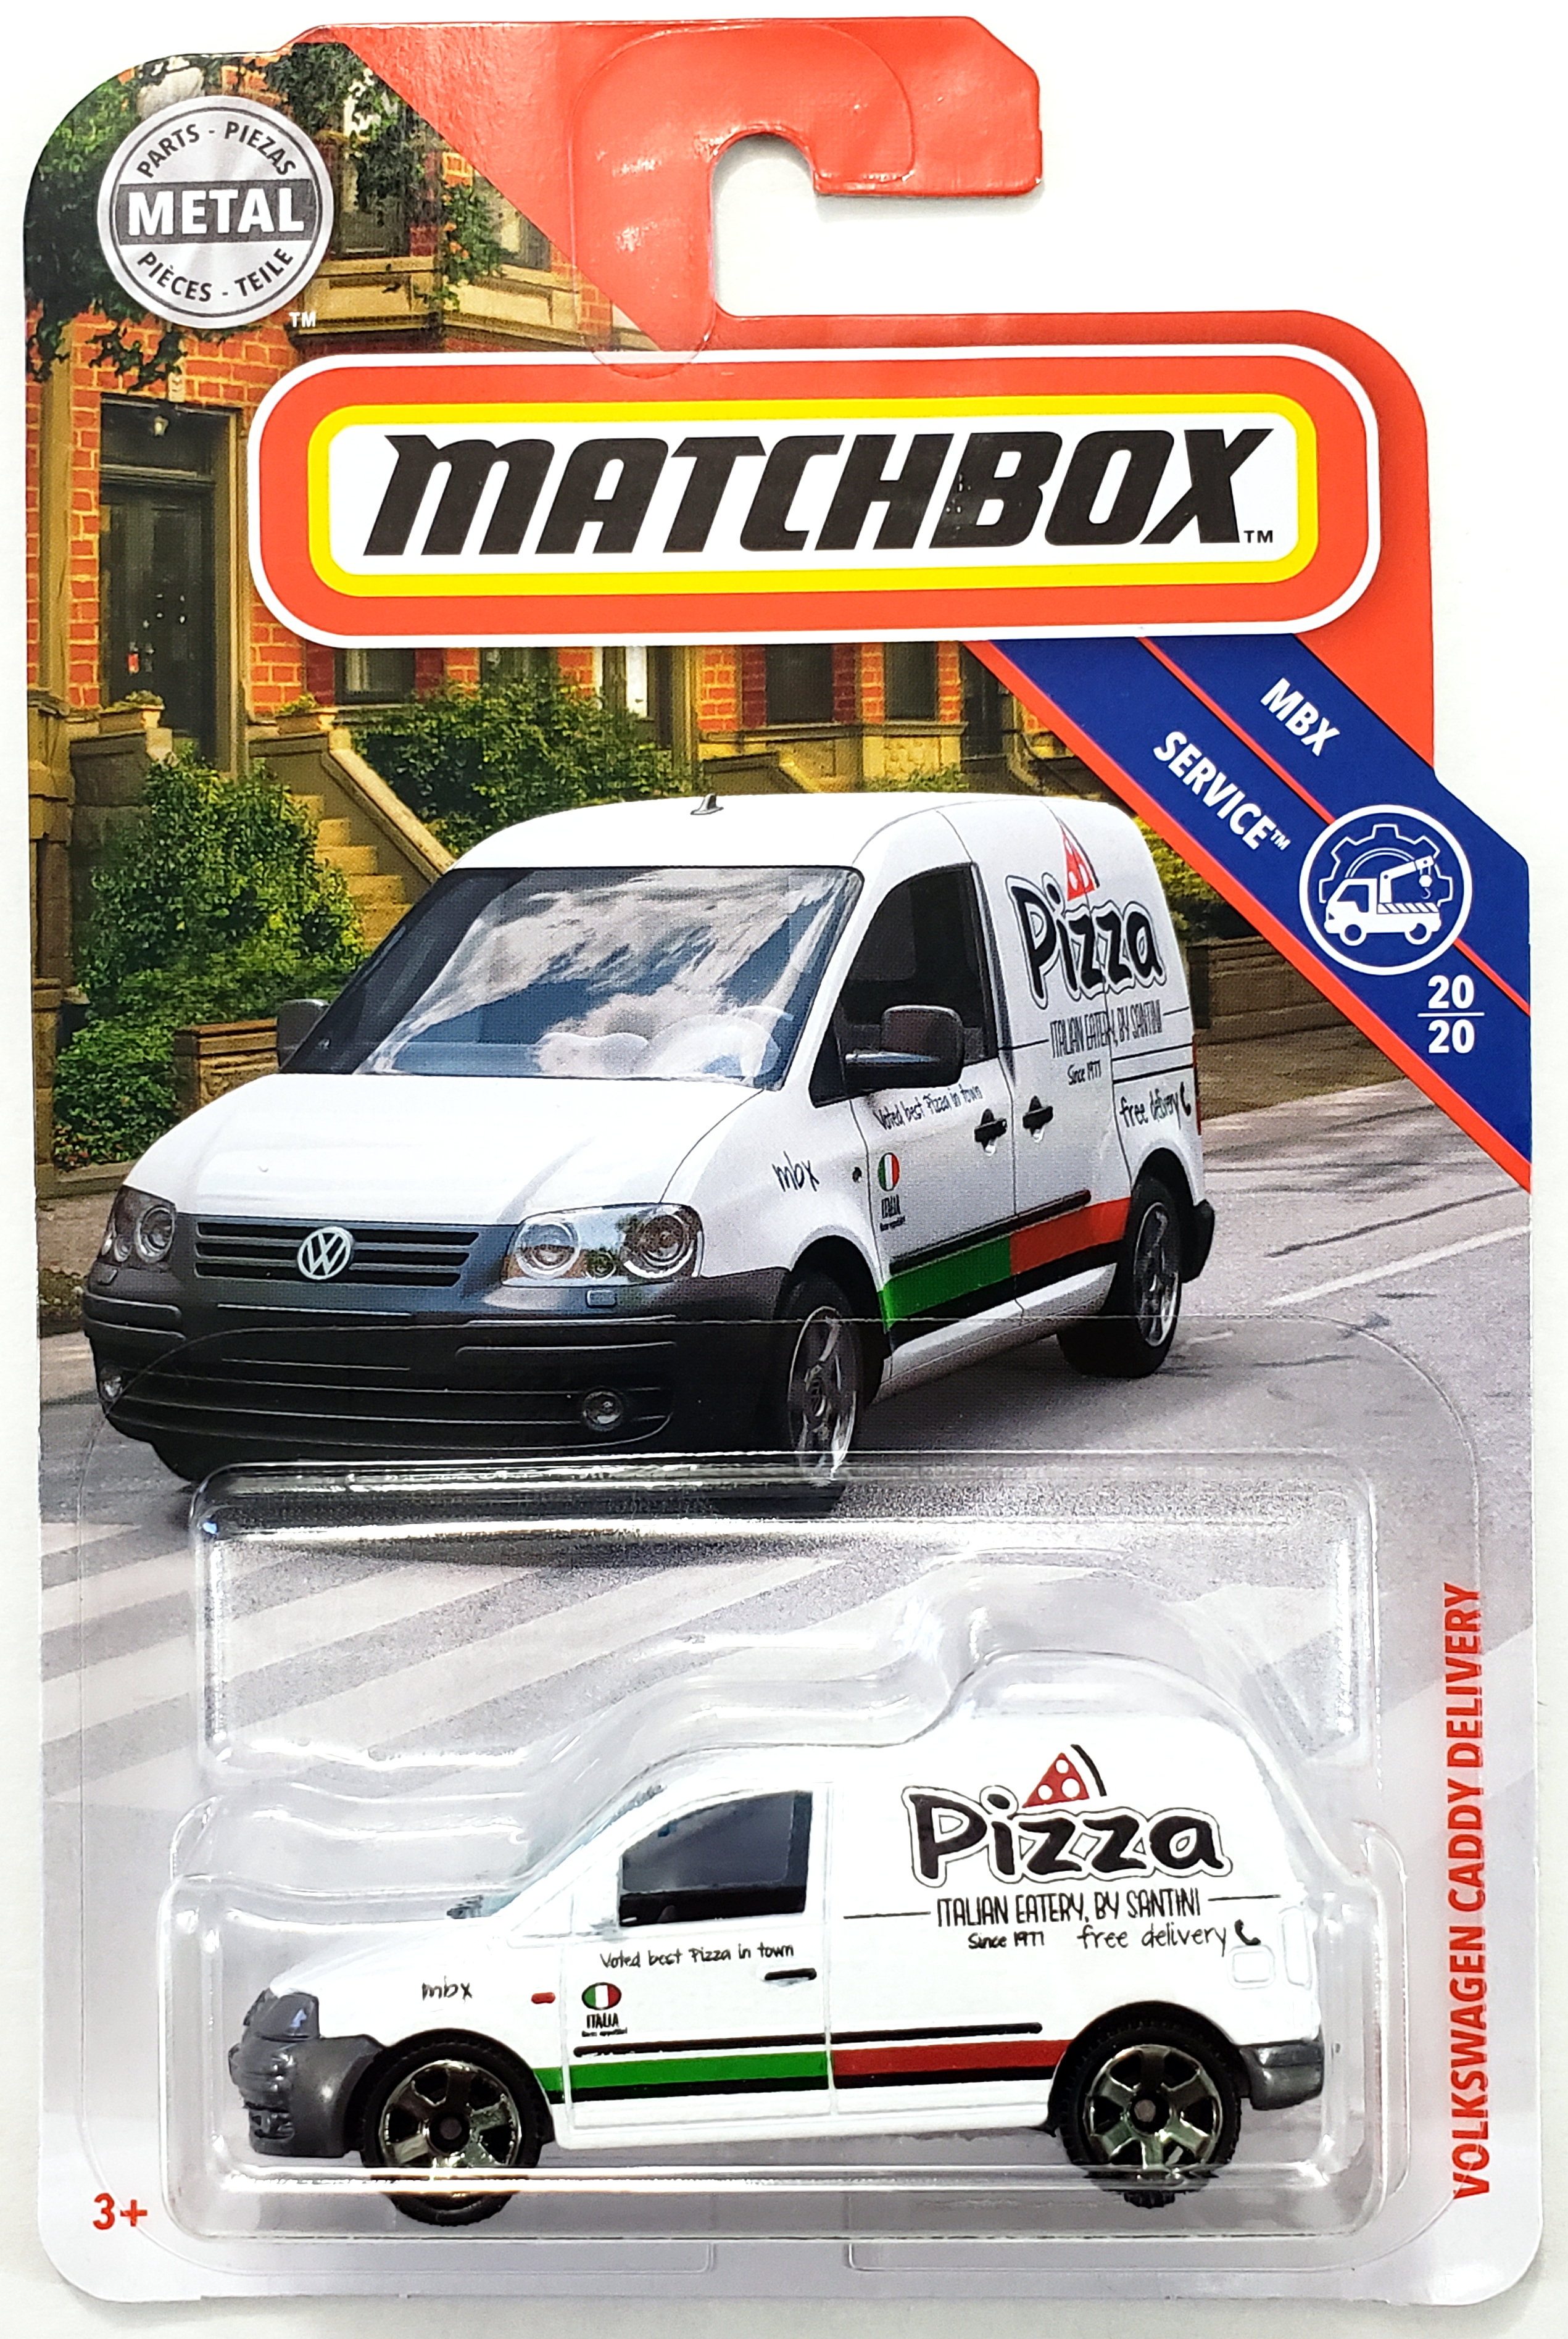 MATCHBOX VOLKSWAGEN CADDY DELIVERY Metal MBX SERVICE 20/20 PIZZA 86/100 B102 